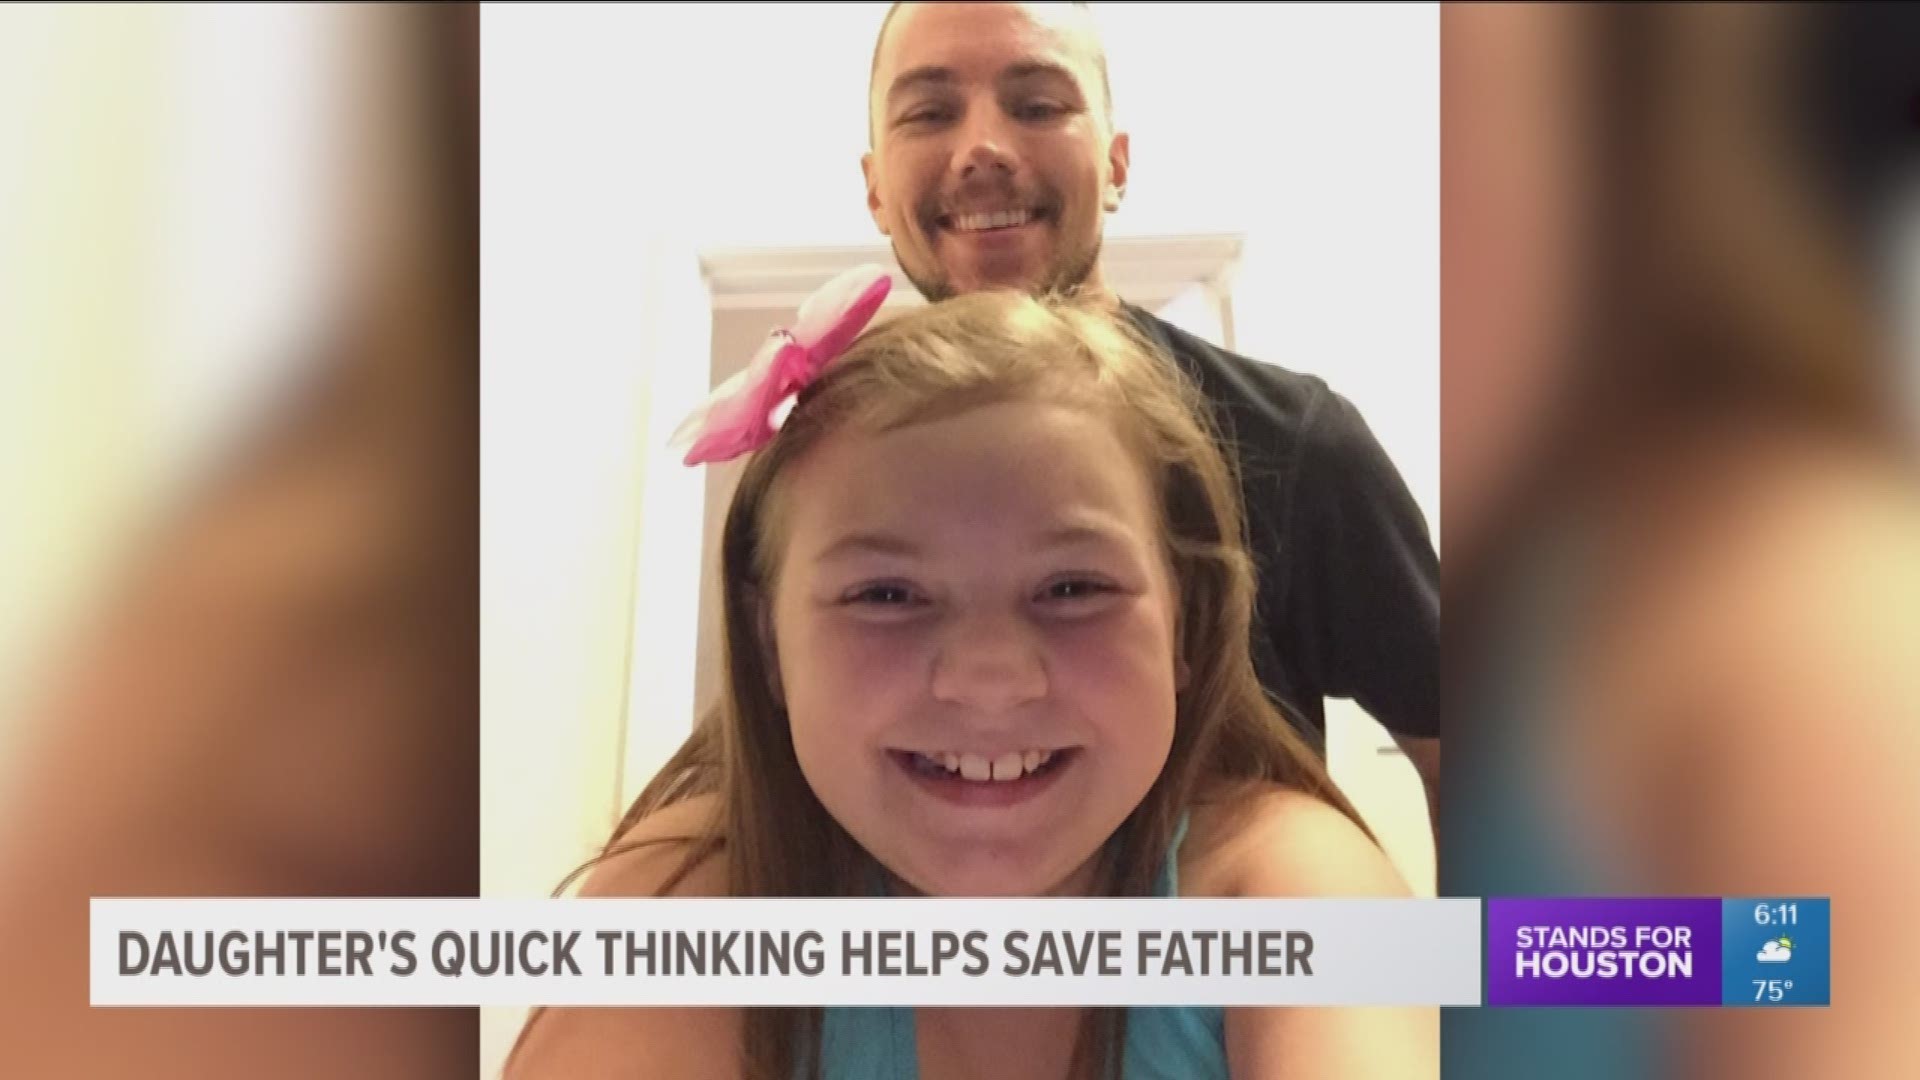 A young girl is being hailed a hero after her dad suffered a medical emergency.